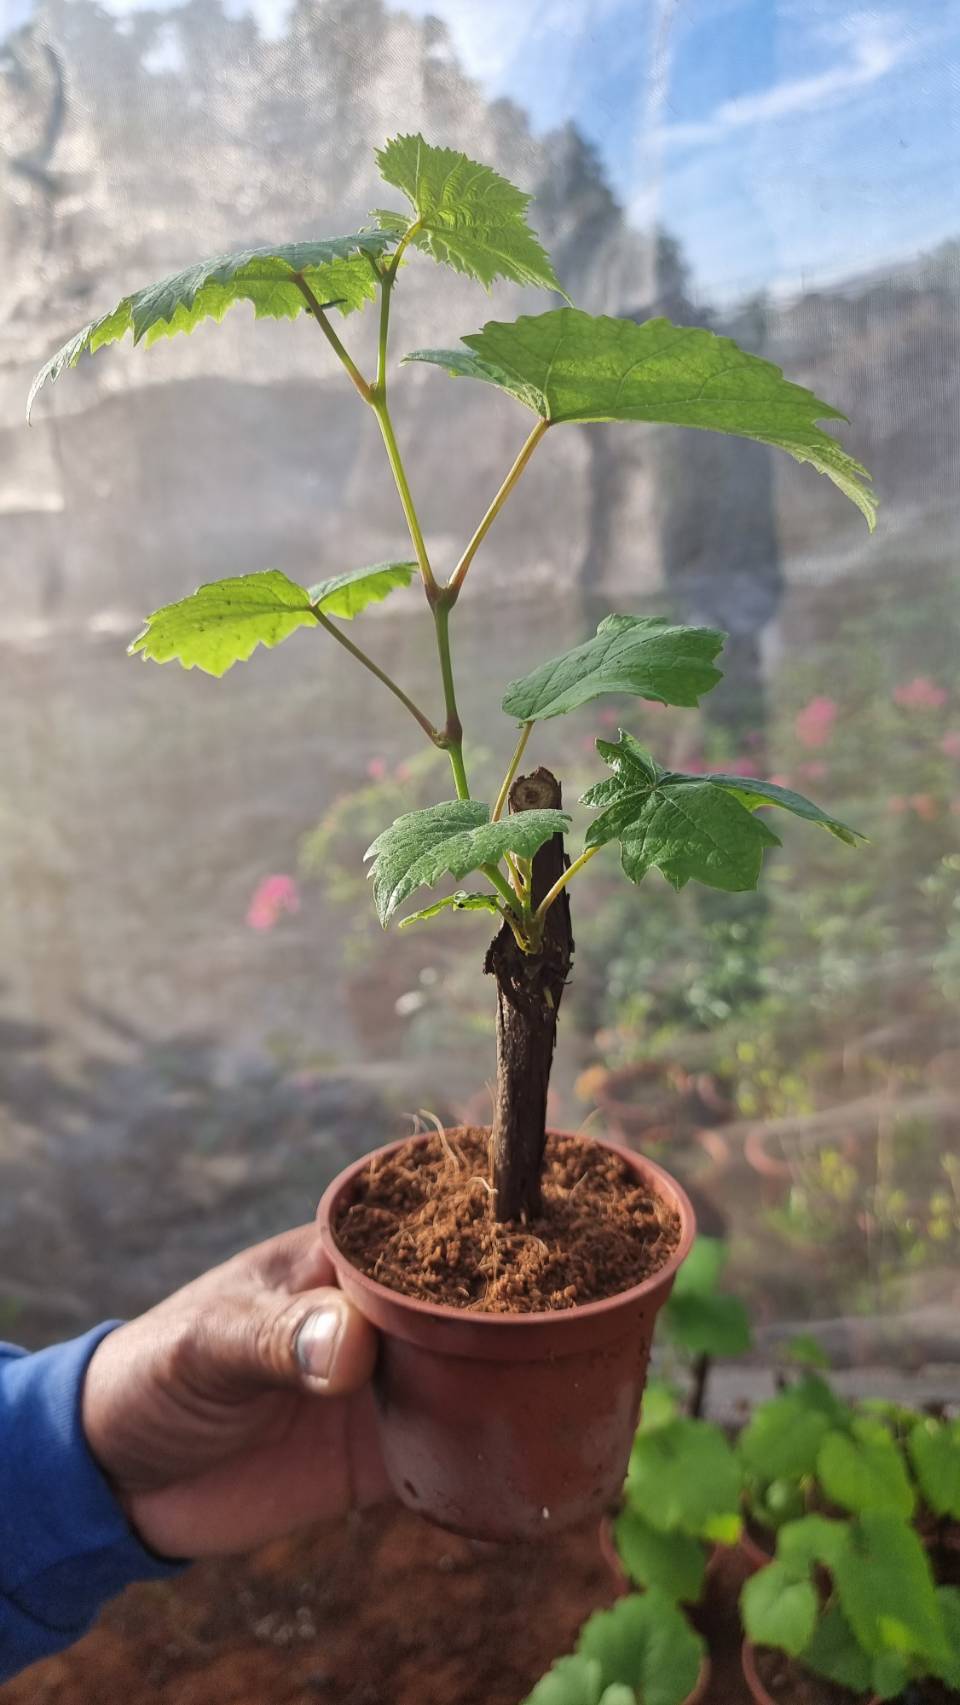 Live Rooted Grapes Plant (Taiwan Variety)